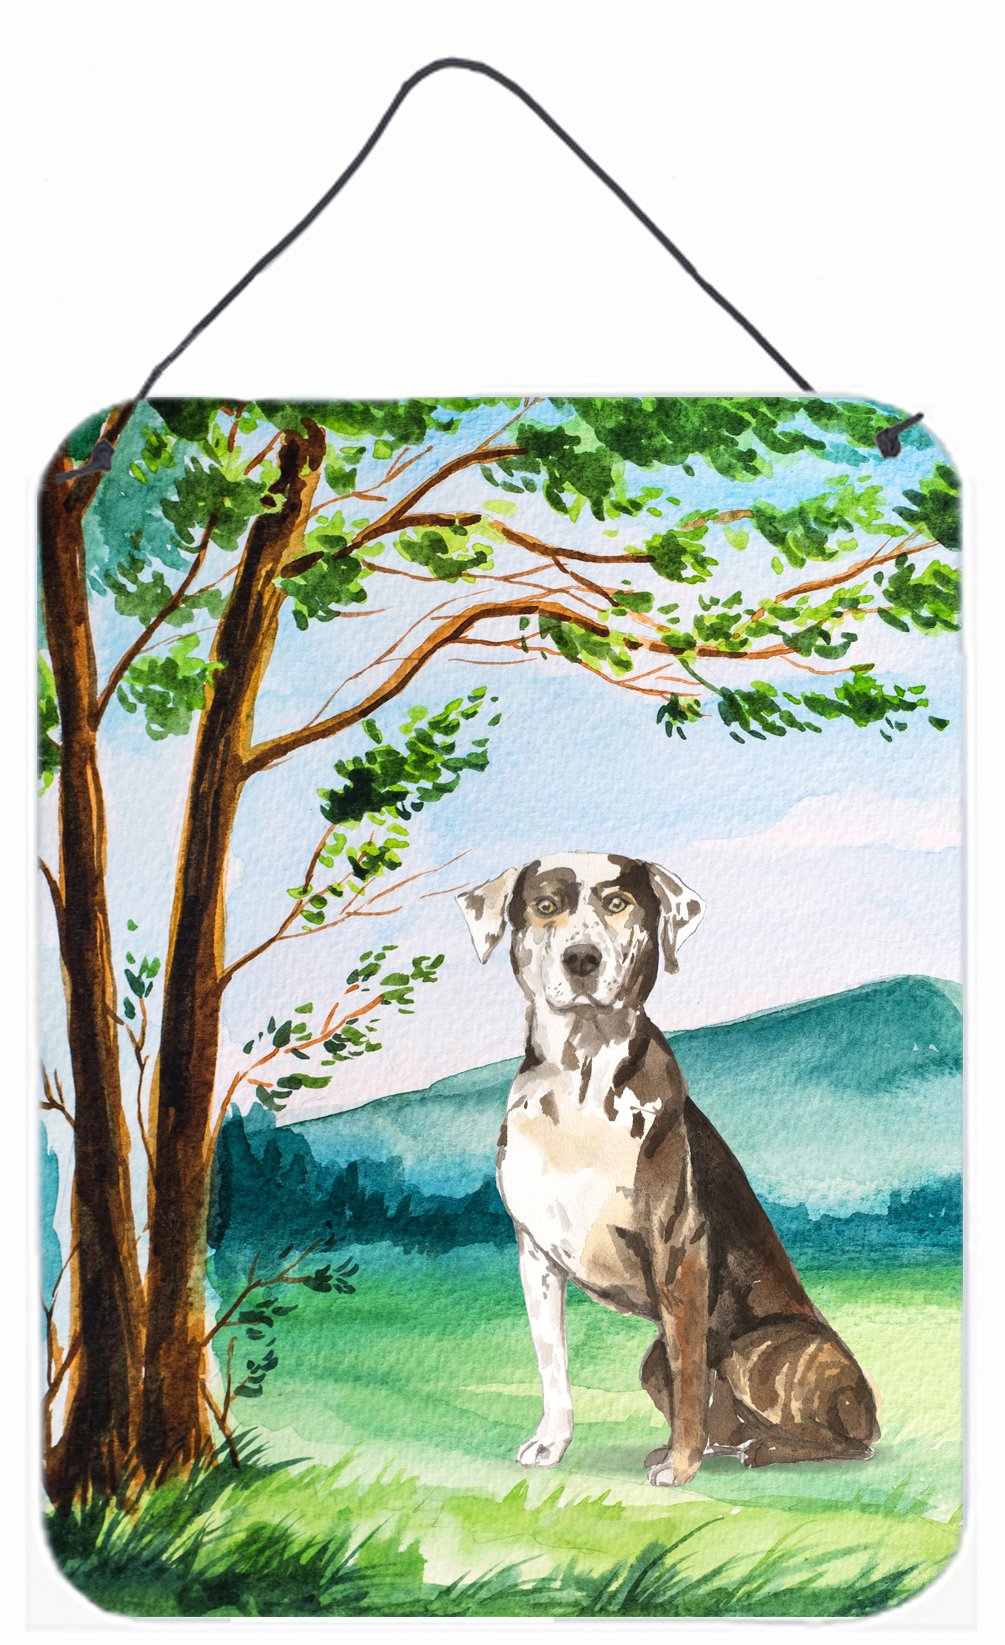 Under the Tree Catahoula Leopard Dog Wall or Door Hanging Prints CK2576DS1216 by Caroline's Treasures